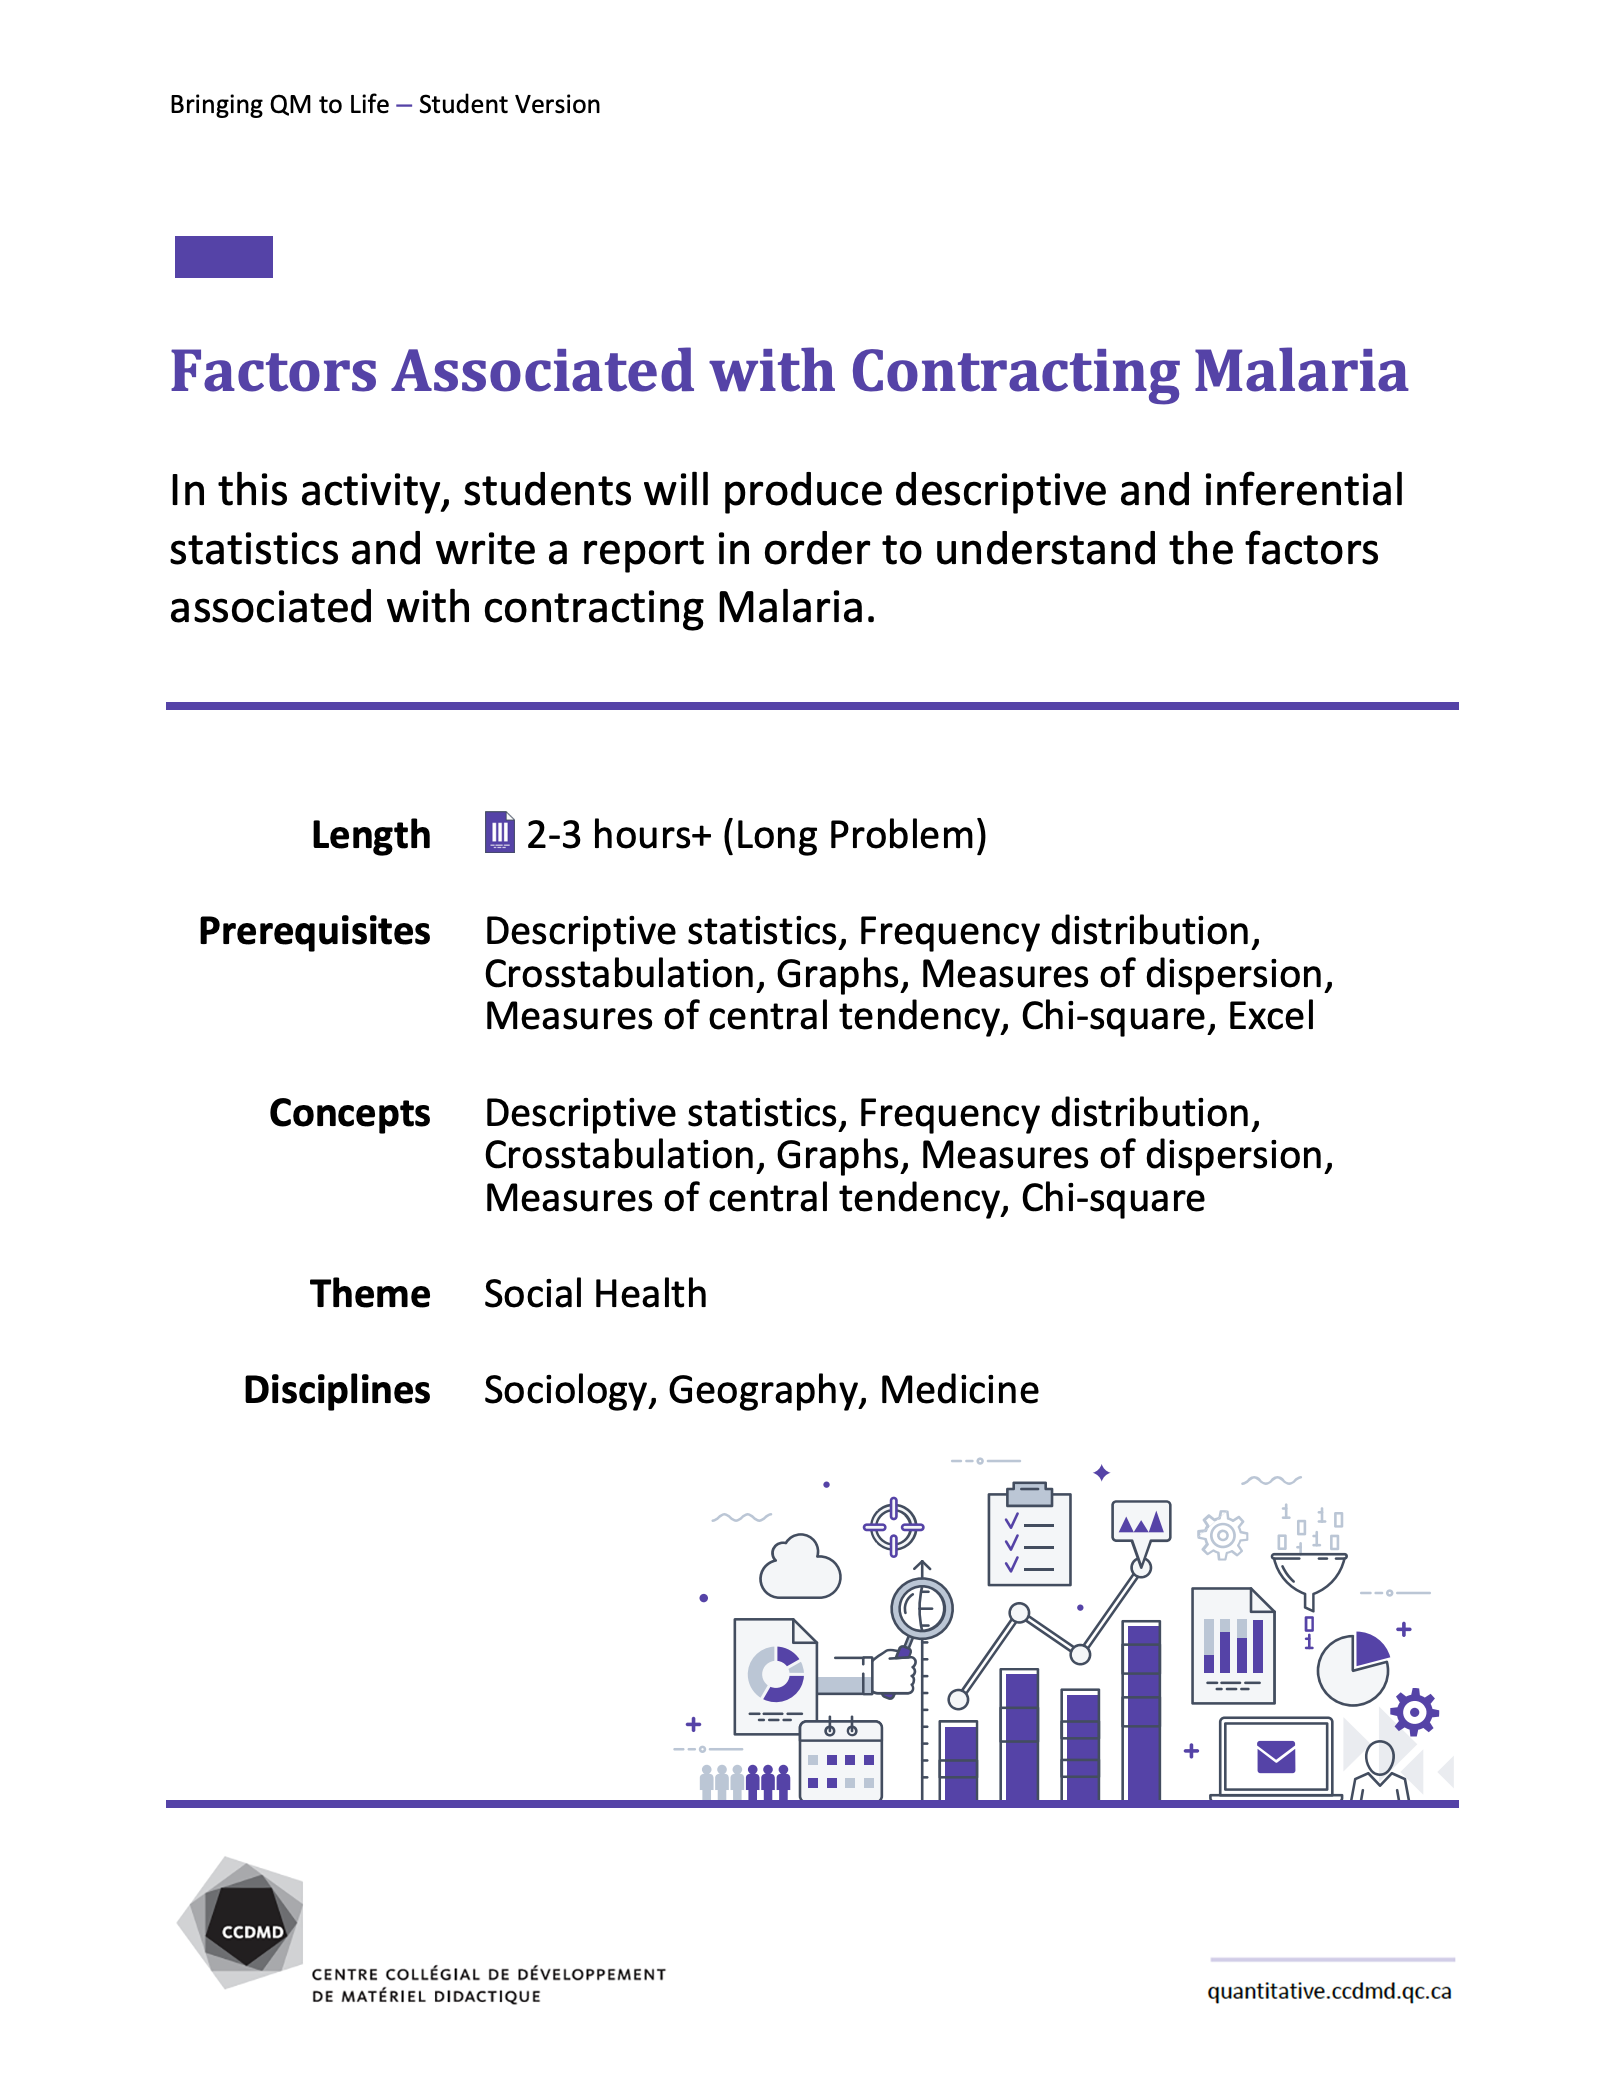 Factors Associated with Contracting Malaria